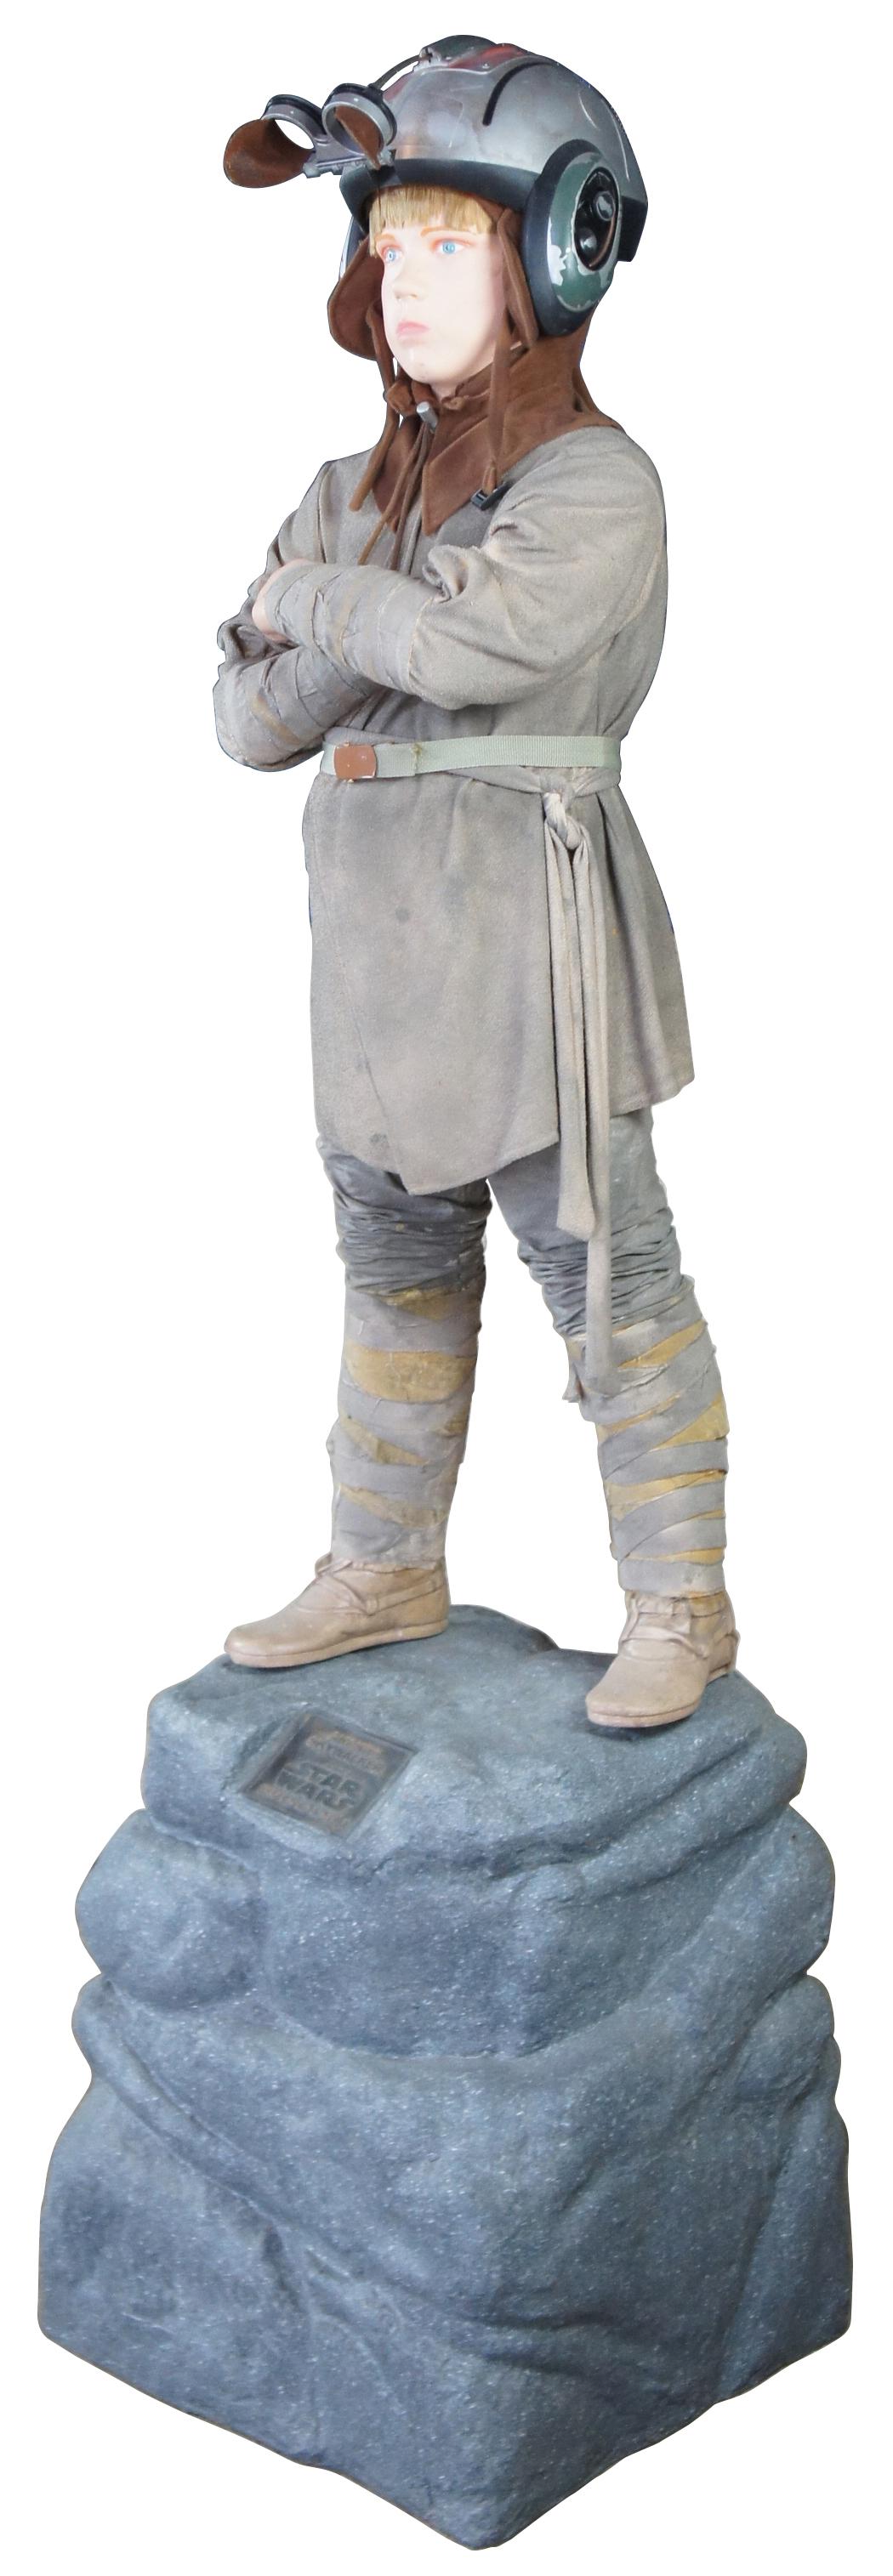 Life size fiberglass prop of Anakin Skywalker from Star Wars Episode 1. Features Lord Vader as a youth in his pod racing outfit with articulating goggles standing cross arm atop a boulder. Displayed at JC Penney and given away as a raffle promotion